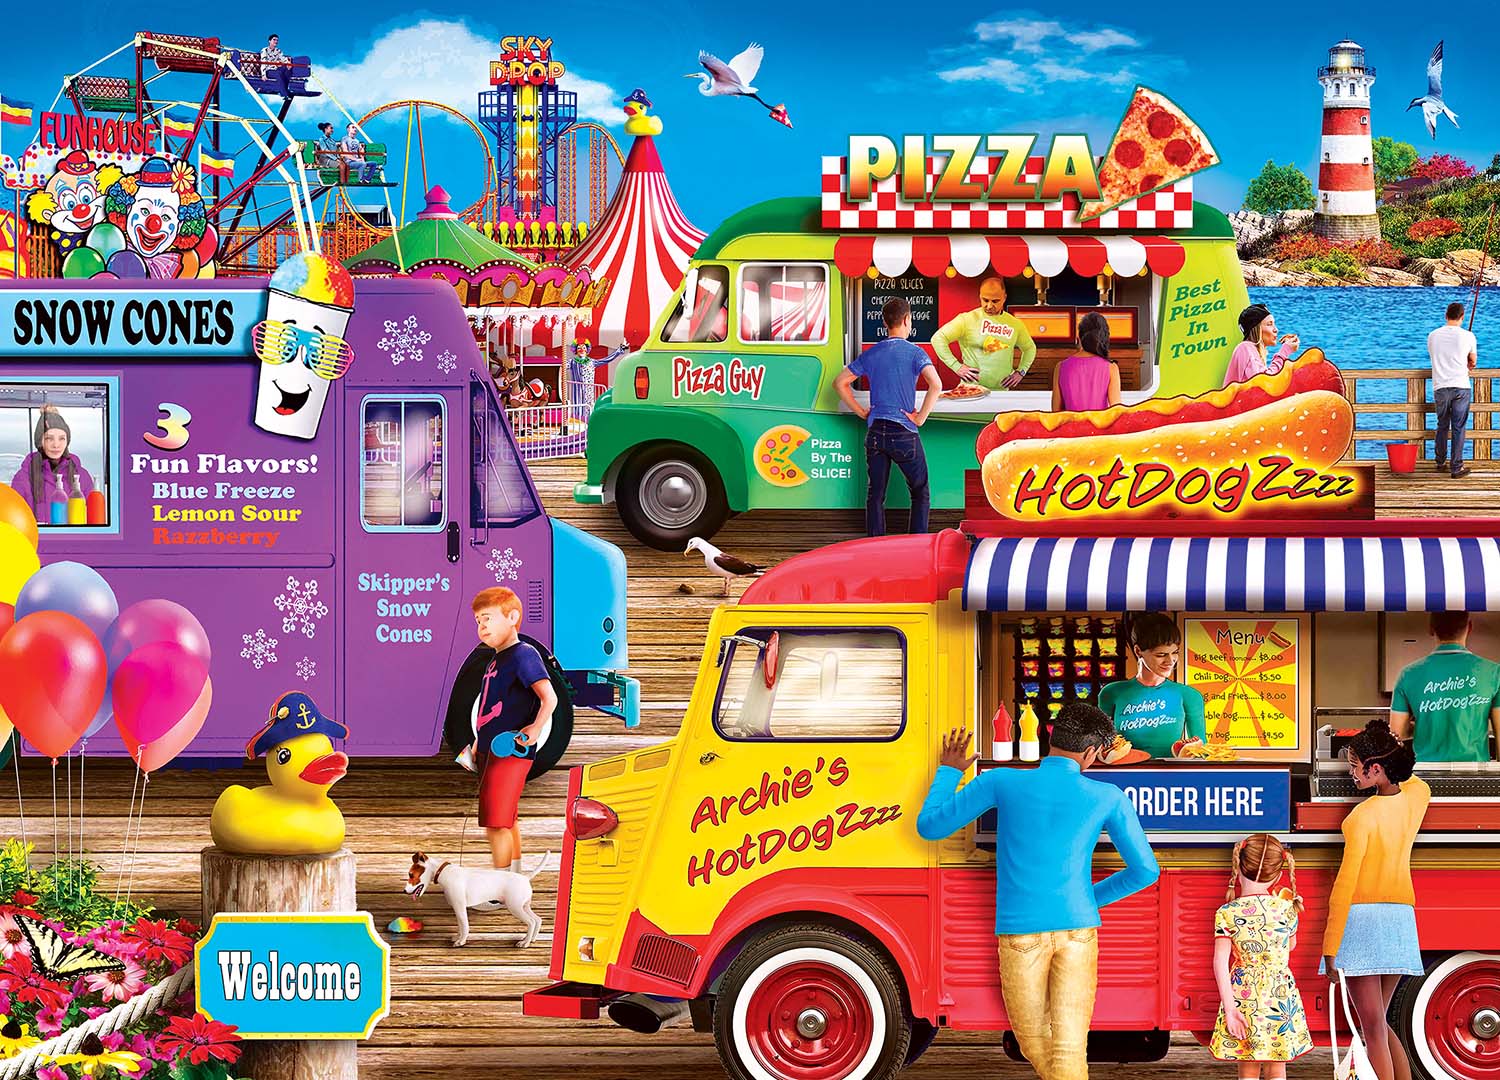 Carnival Treats Food and Drink Jigsaw Puzzle